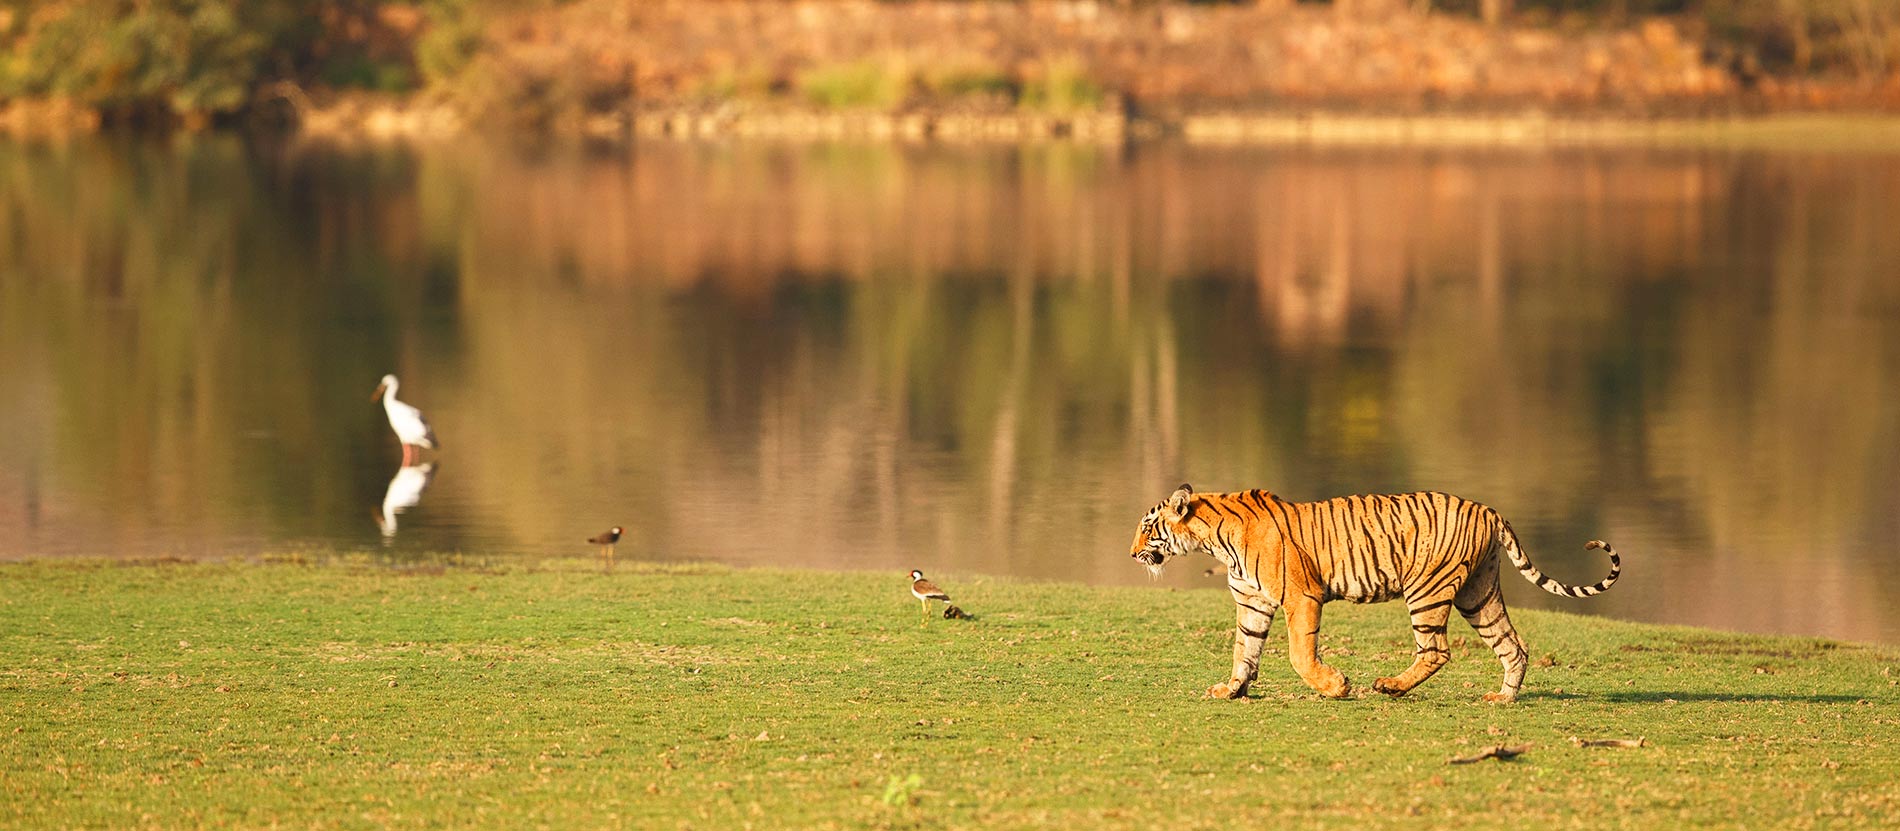 National Parks and Wildlife Safaris are a must see while backpacking India